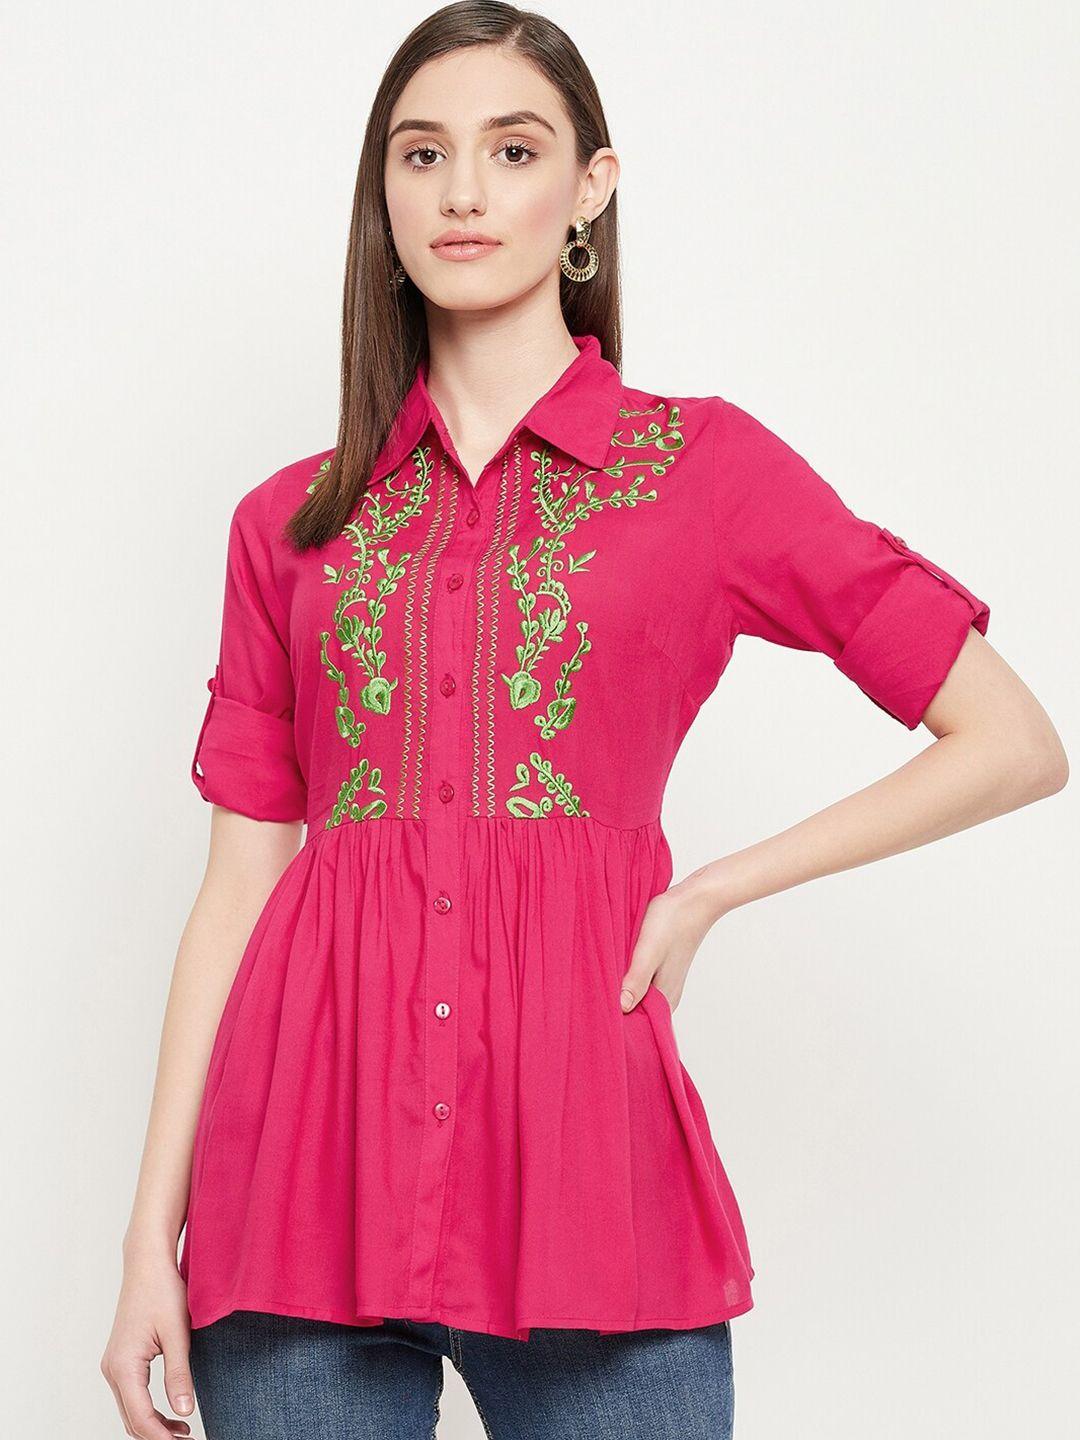 ishin fuchsia floral embroidered shirt style longline top